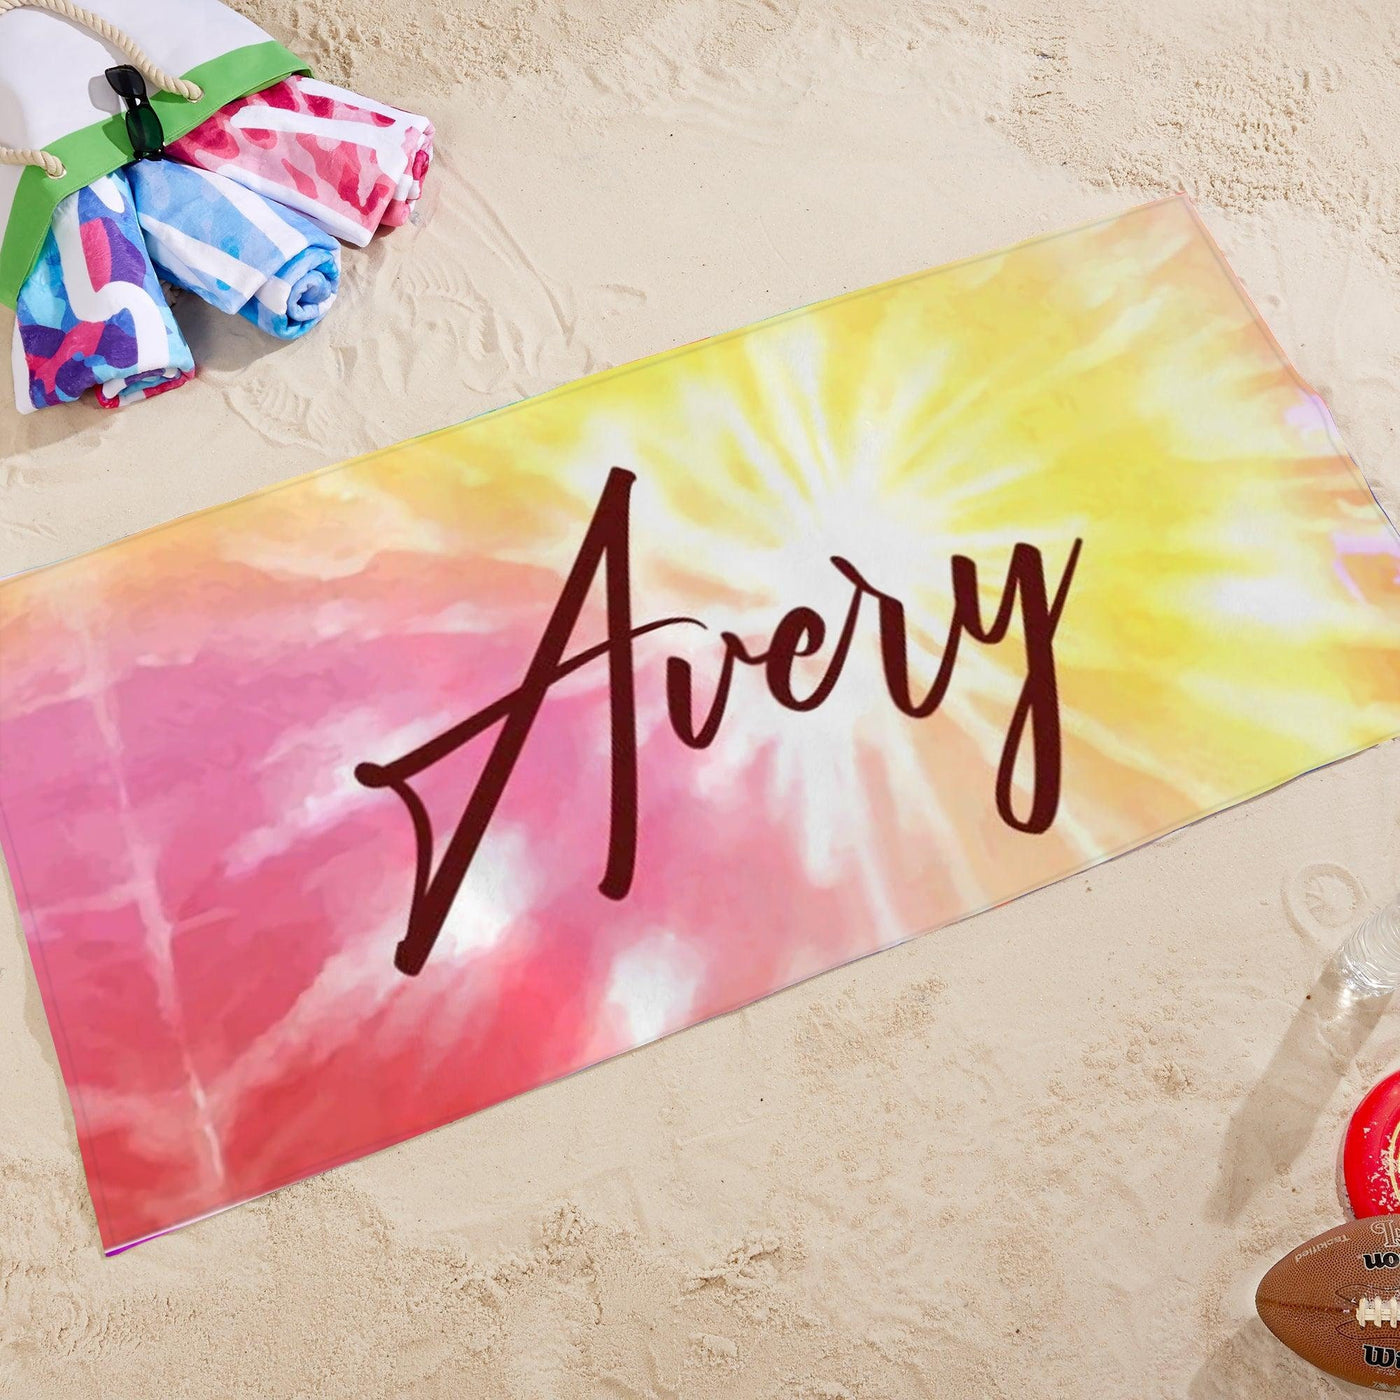 Tie Dye Beach Towel with Your Name - Monogrammed Towels